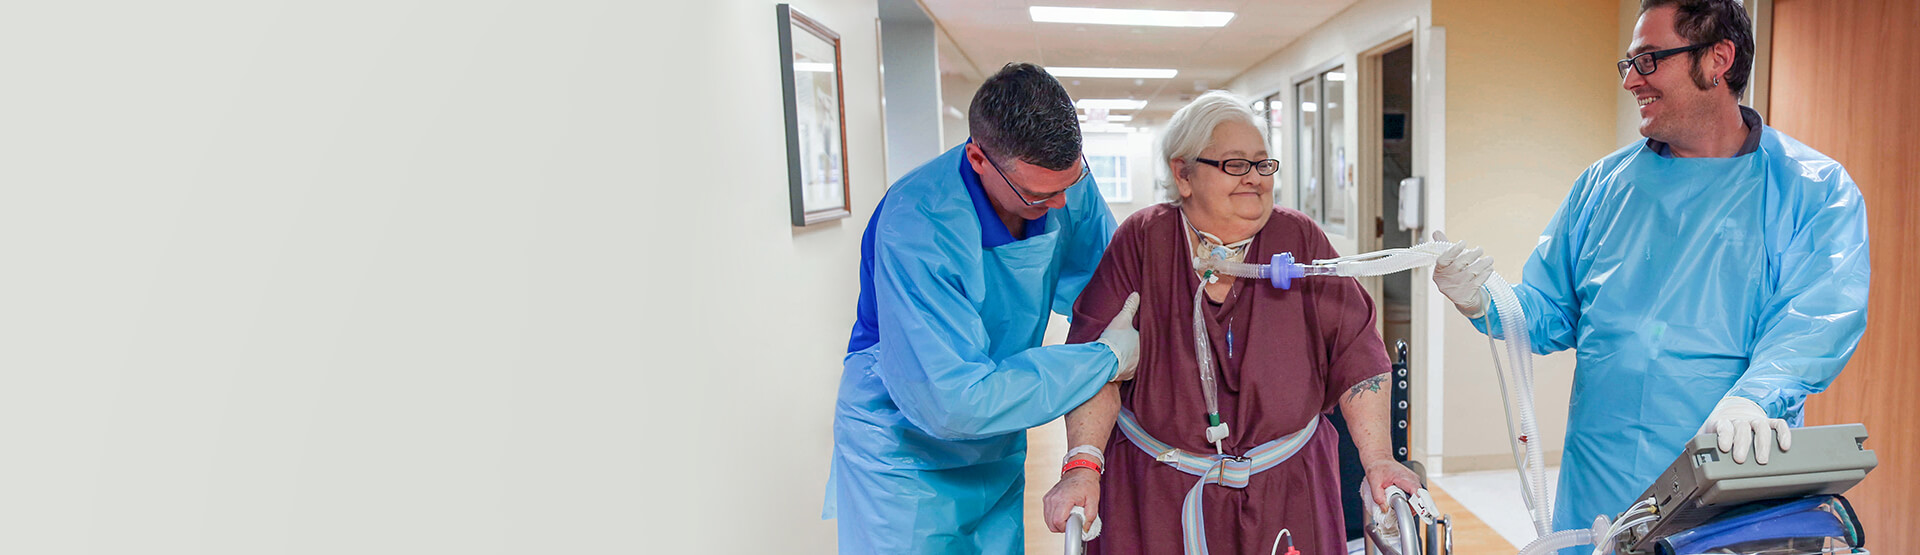 Older female patient standing with a walker while a respiratory therapist holds her ventilator airway tube.